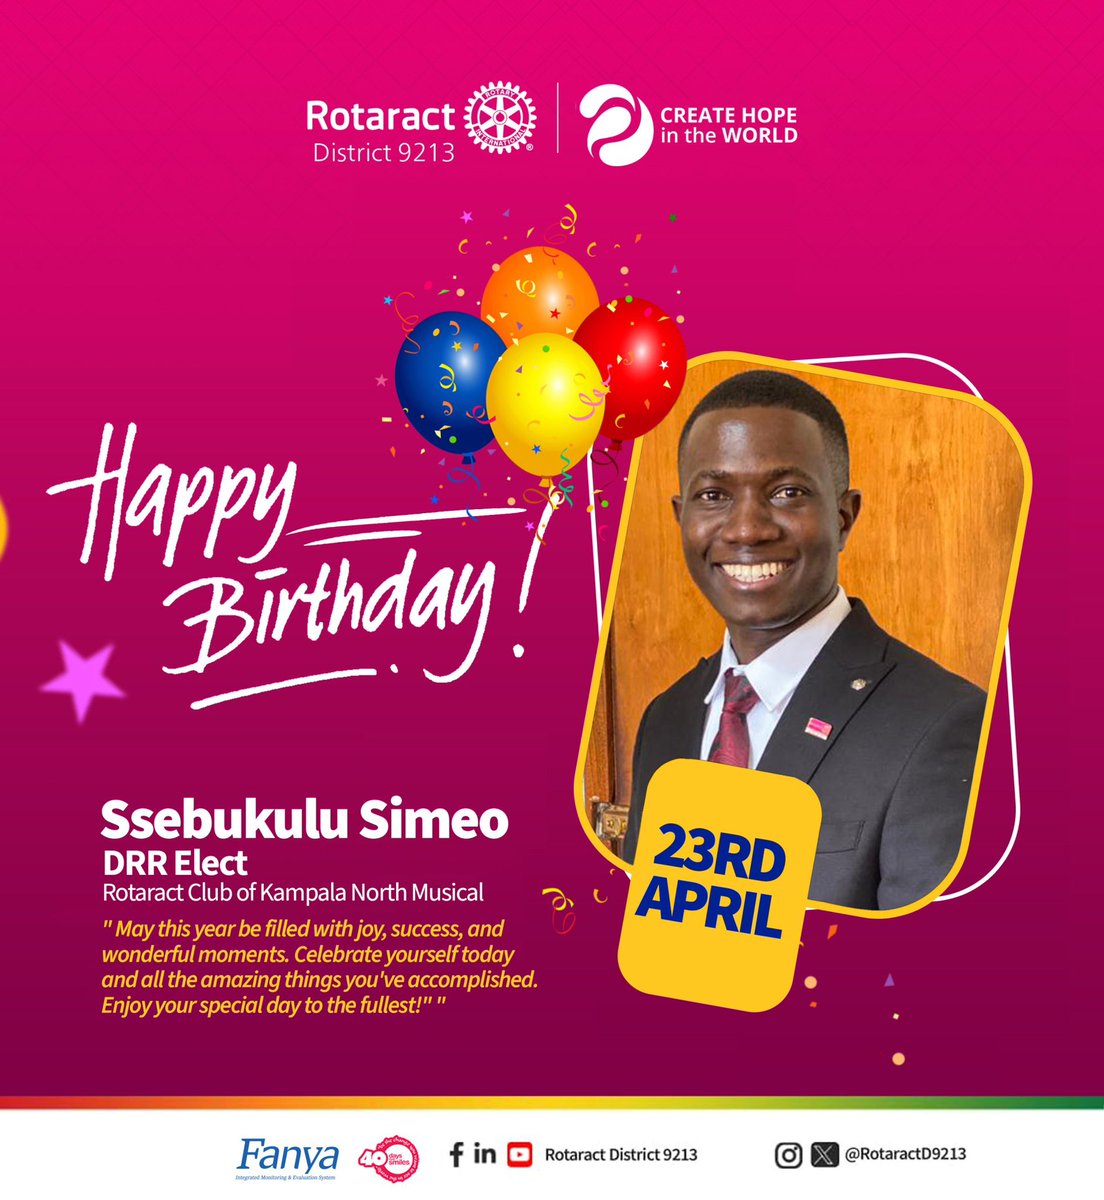 Happy Birthday, Simeo! Your leadership and dedication shine brightly as you step into the role of District Rotaract Representative for our district. May this special day be filled with joy, inspiration, and the warmth of friendship from your fellow Rotaractors. Here's to a year